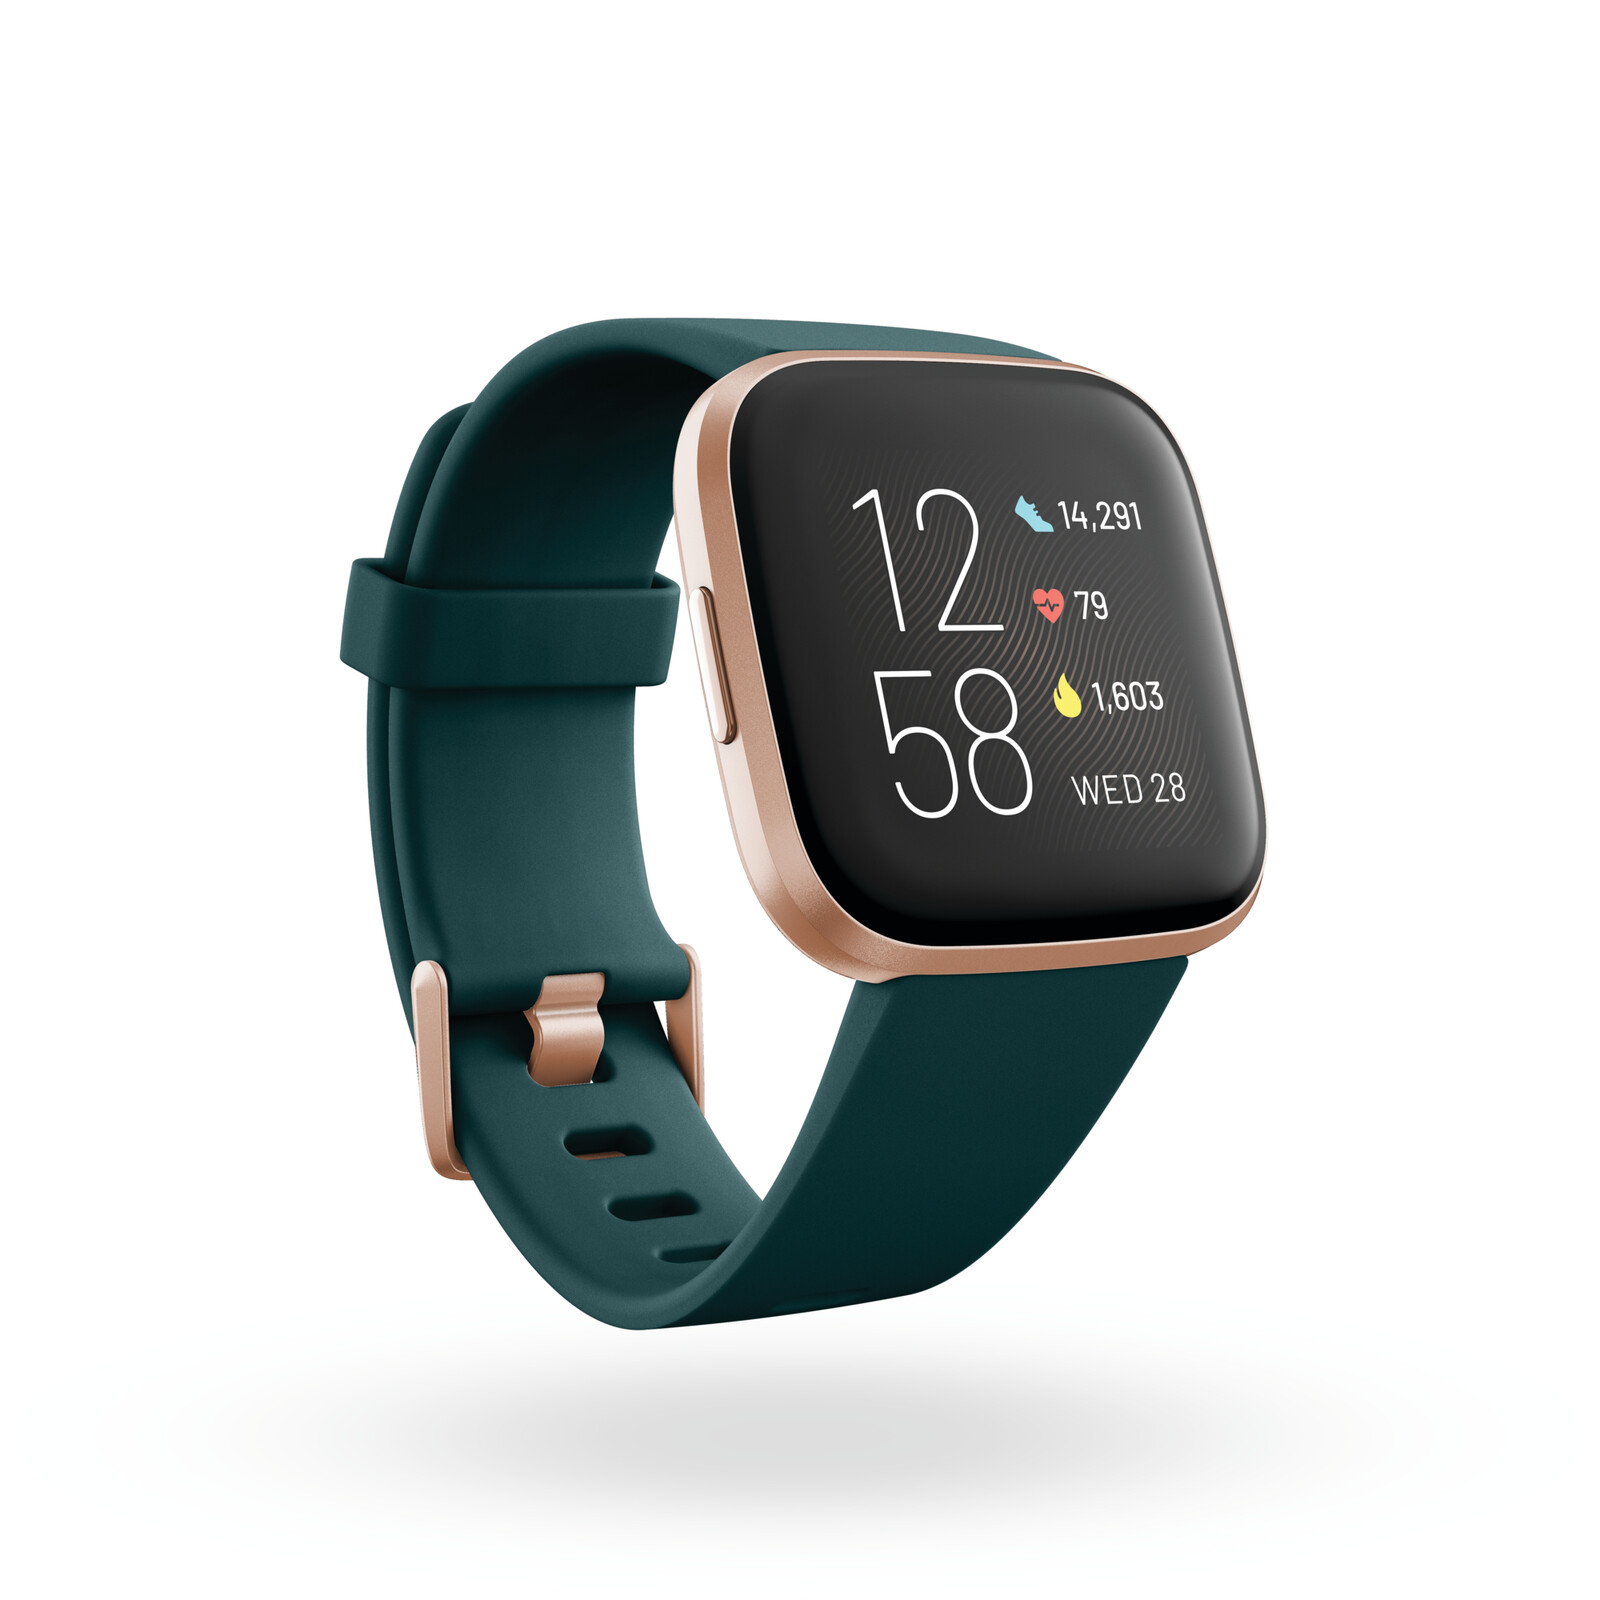 can i use a fitbit without a smartphone